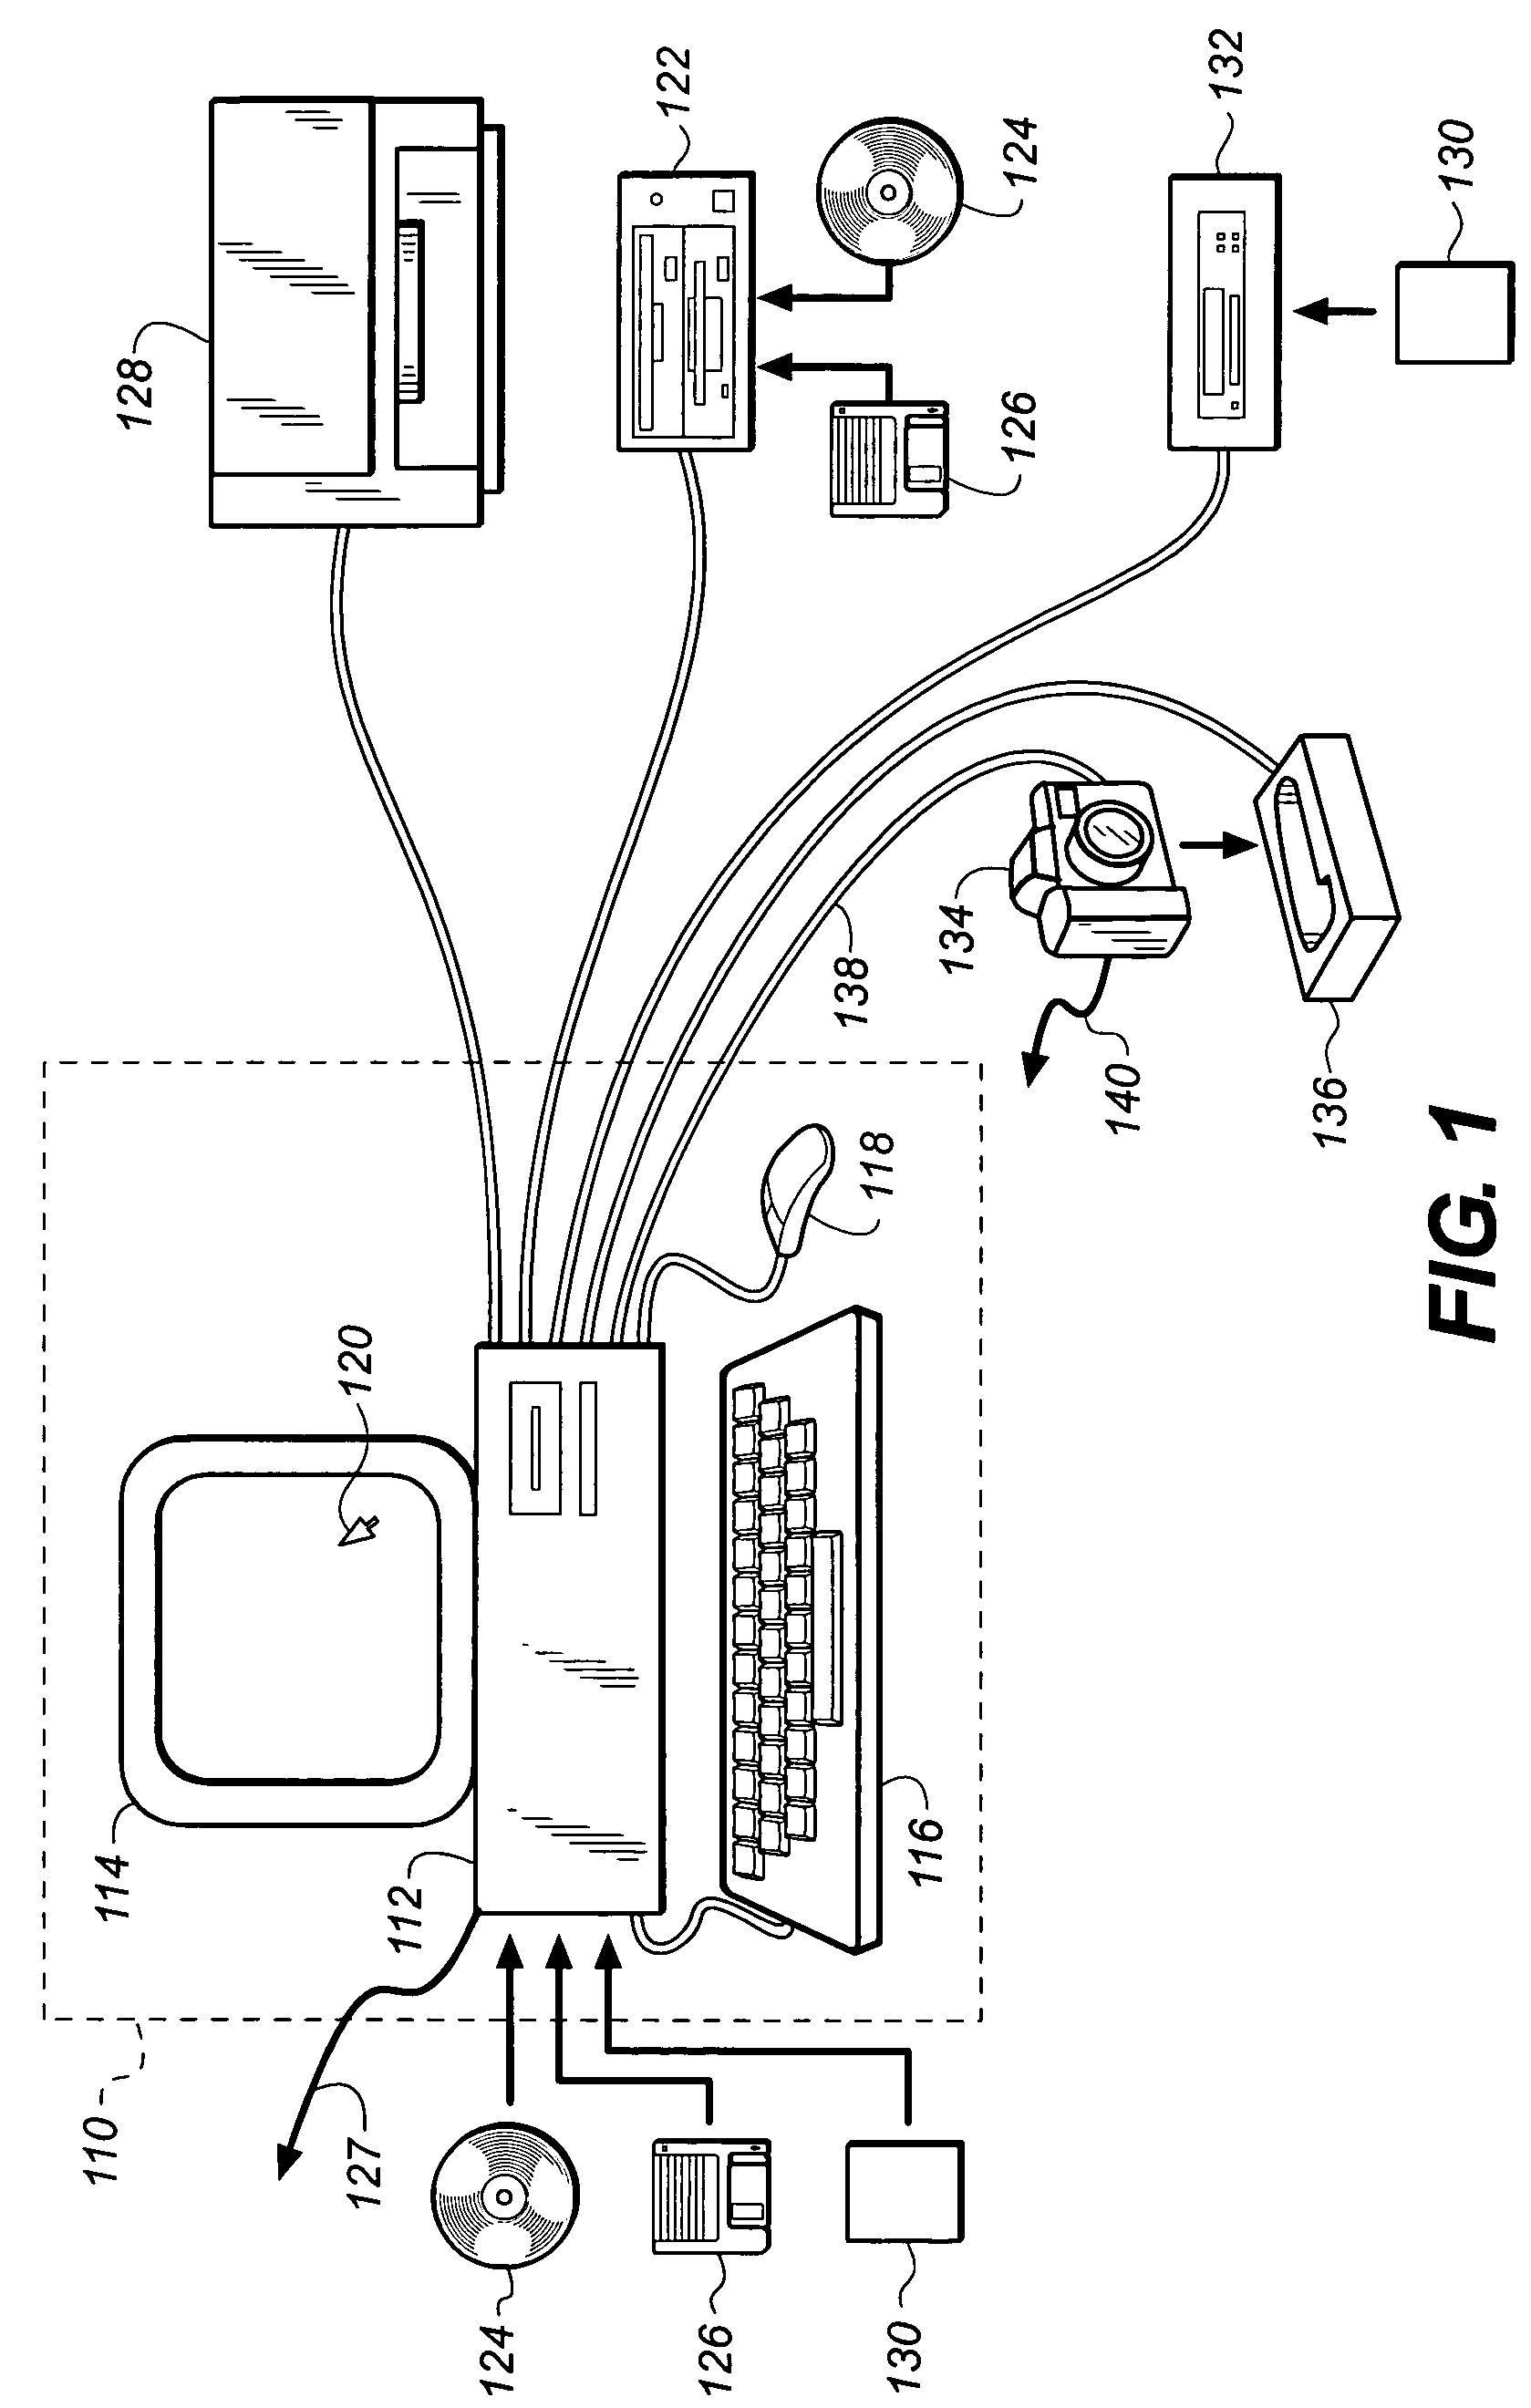 Method and system for video filtering with joint motion and noise estimation